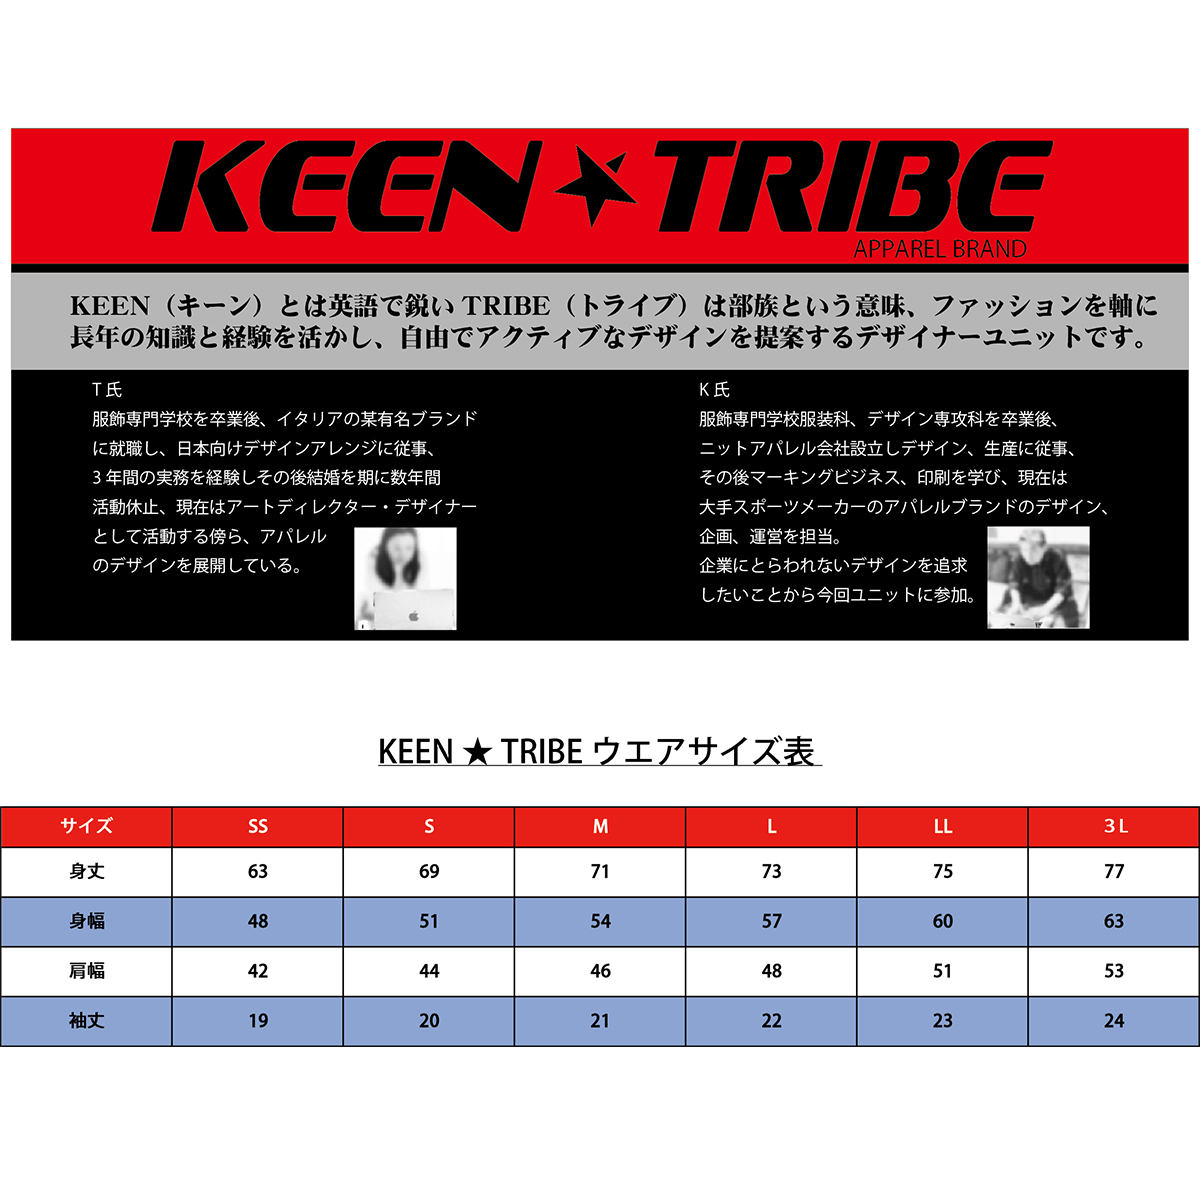 KEEN ★ TRIBE　KT-15(受注生産)